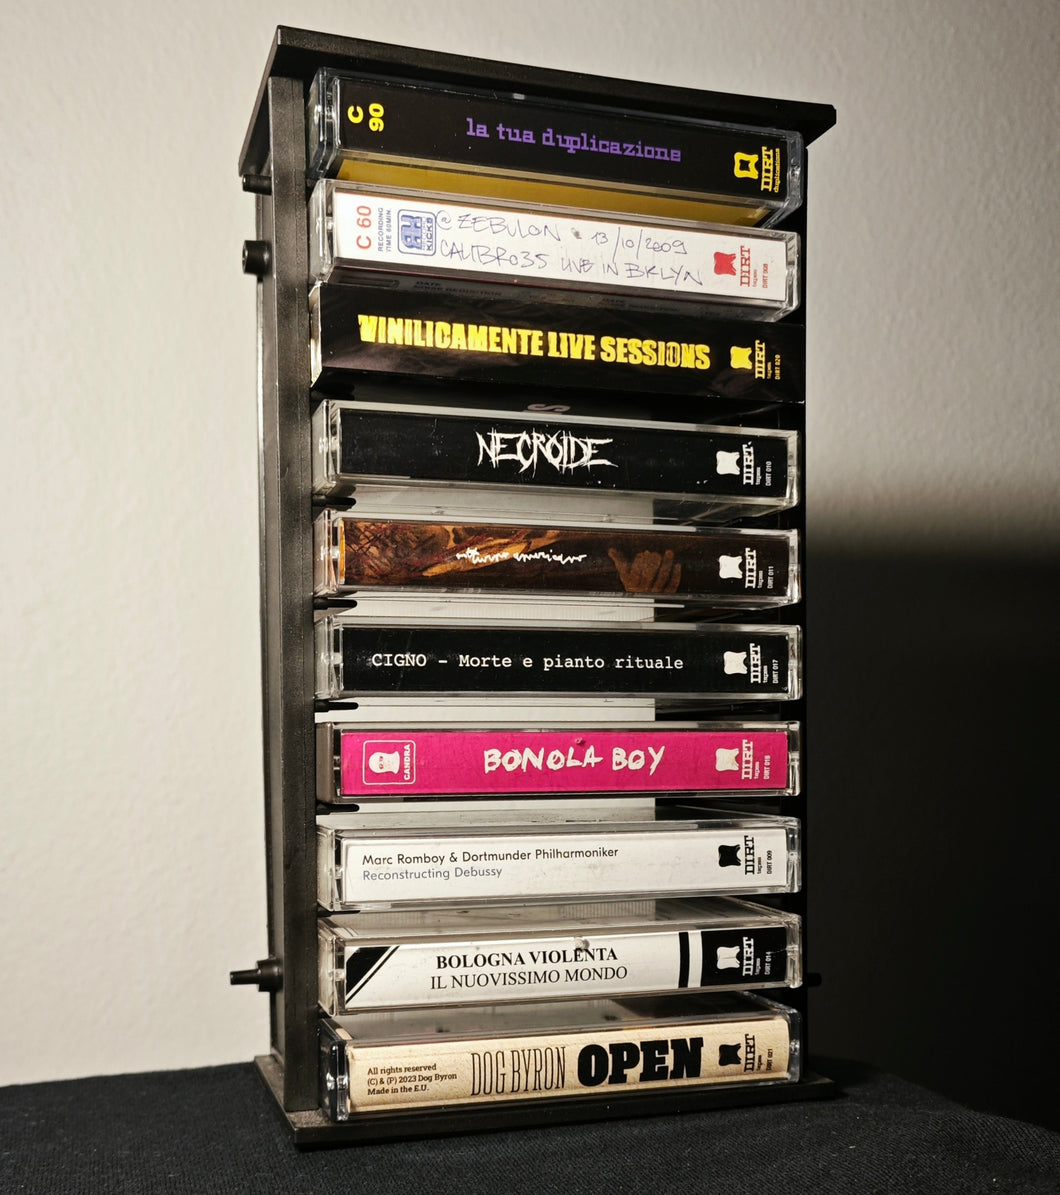 The 10 pack rack cassettes tapes box - Il portacassette in vinile di Dirt Tapes